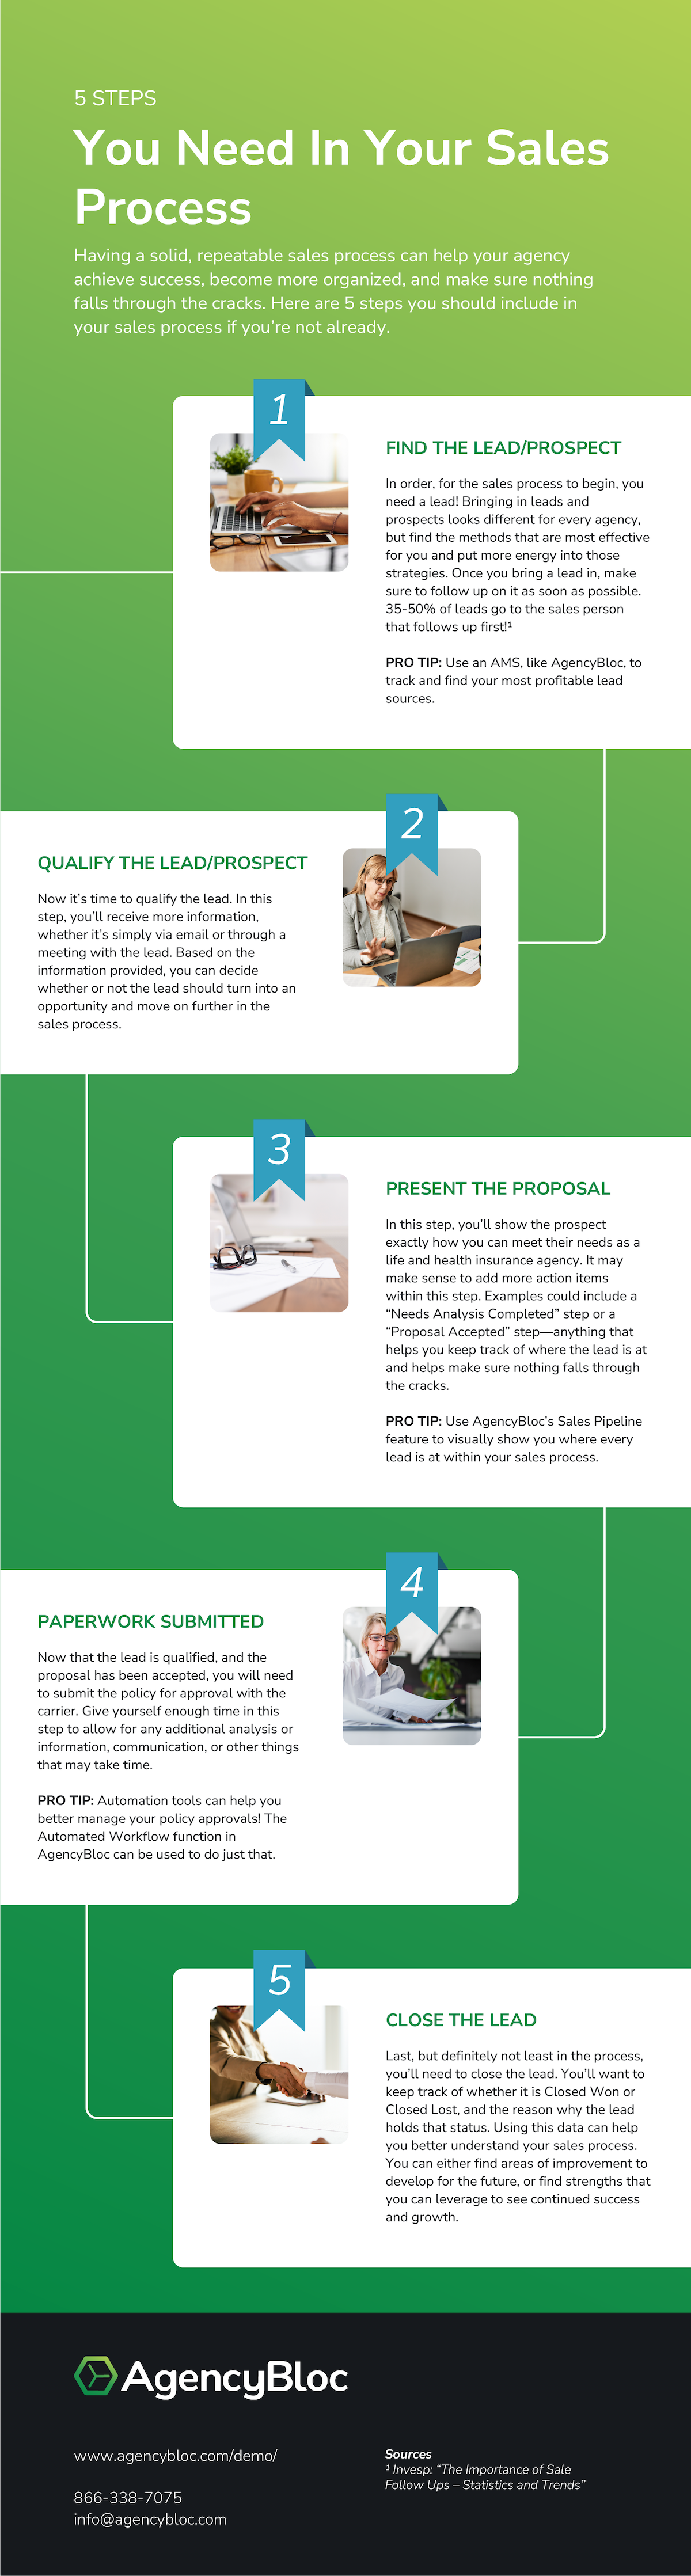 5 Steps You Need in Your Sales Process infographic